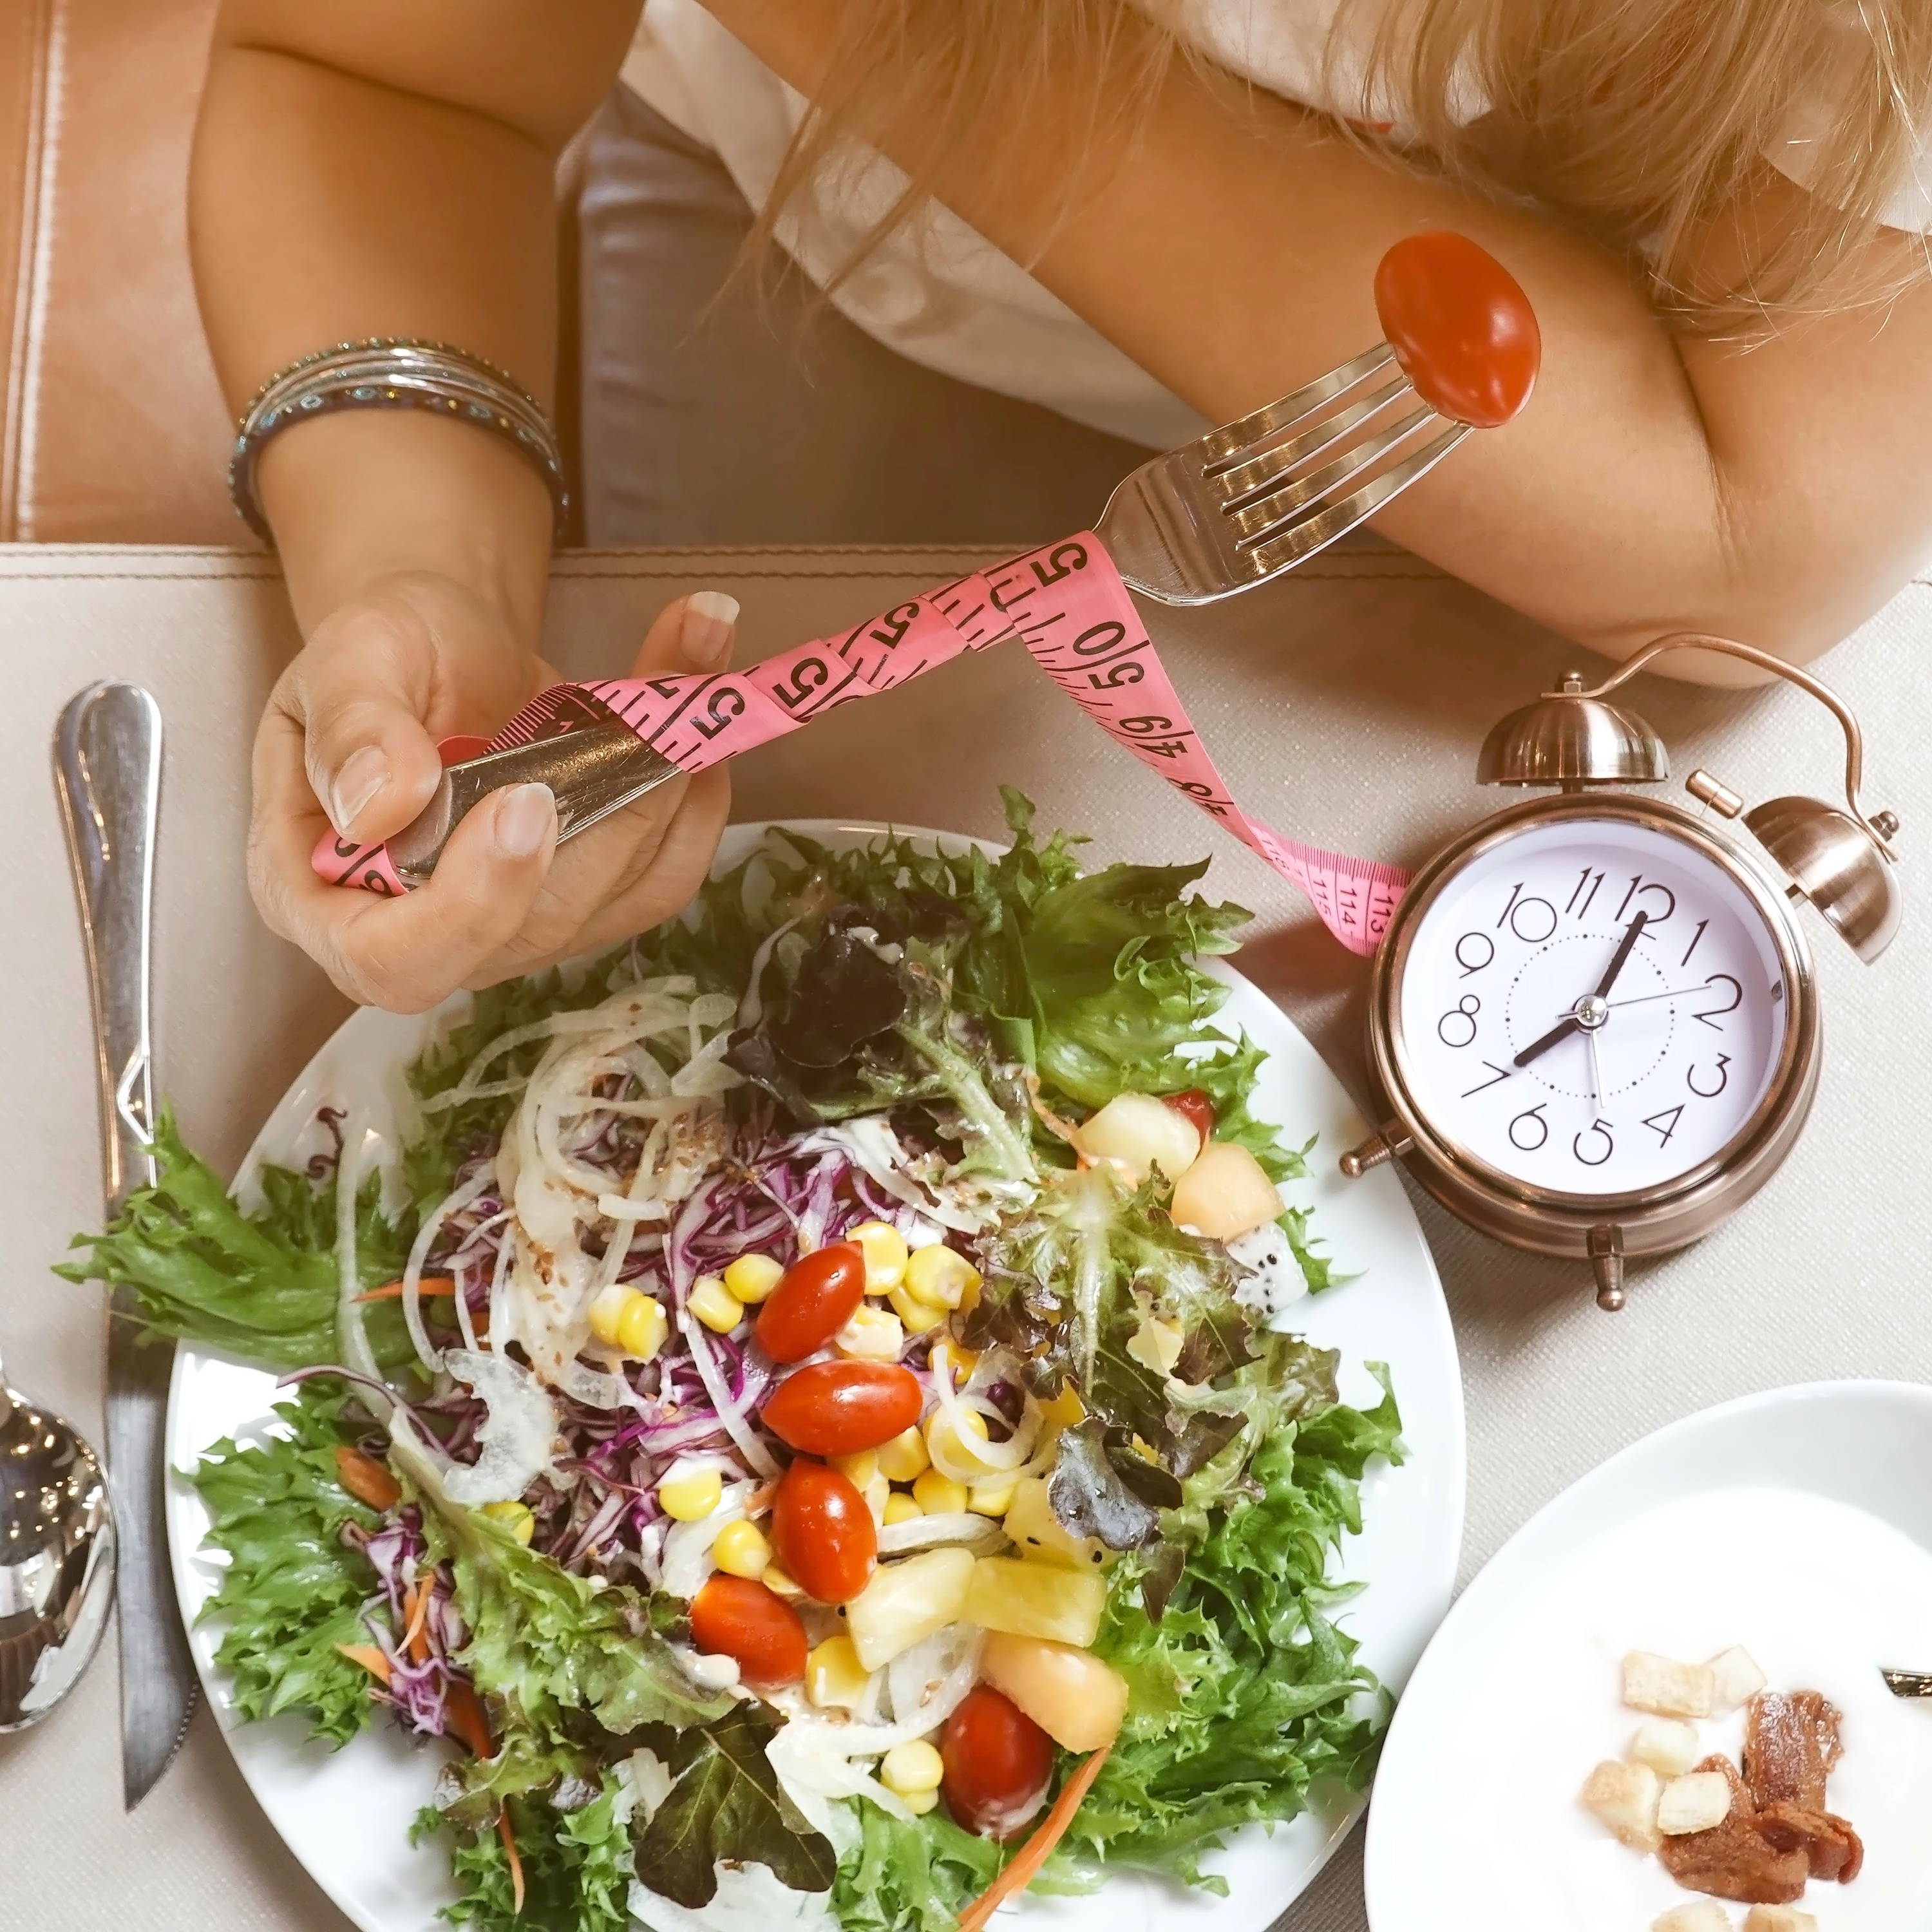 There are several different ways vegans and vegetarians can effectively intermittently fast